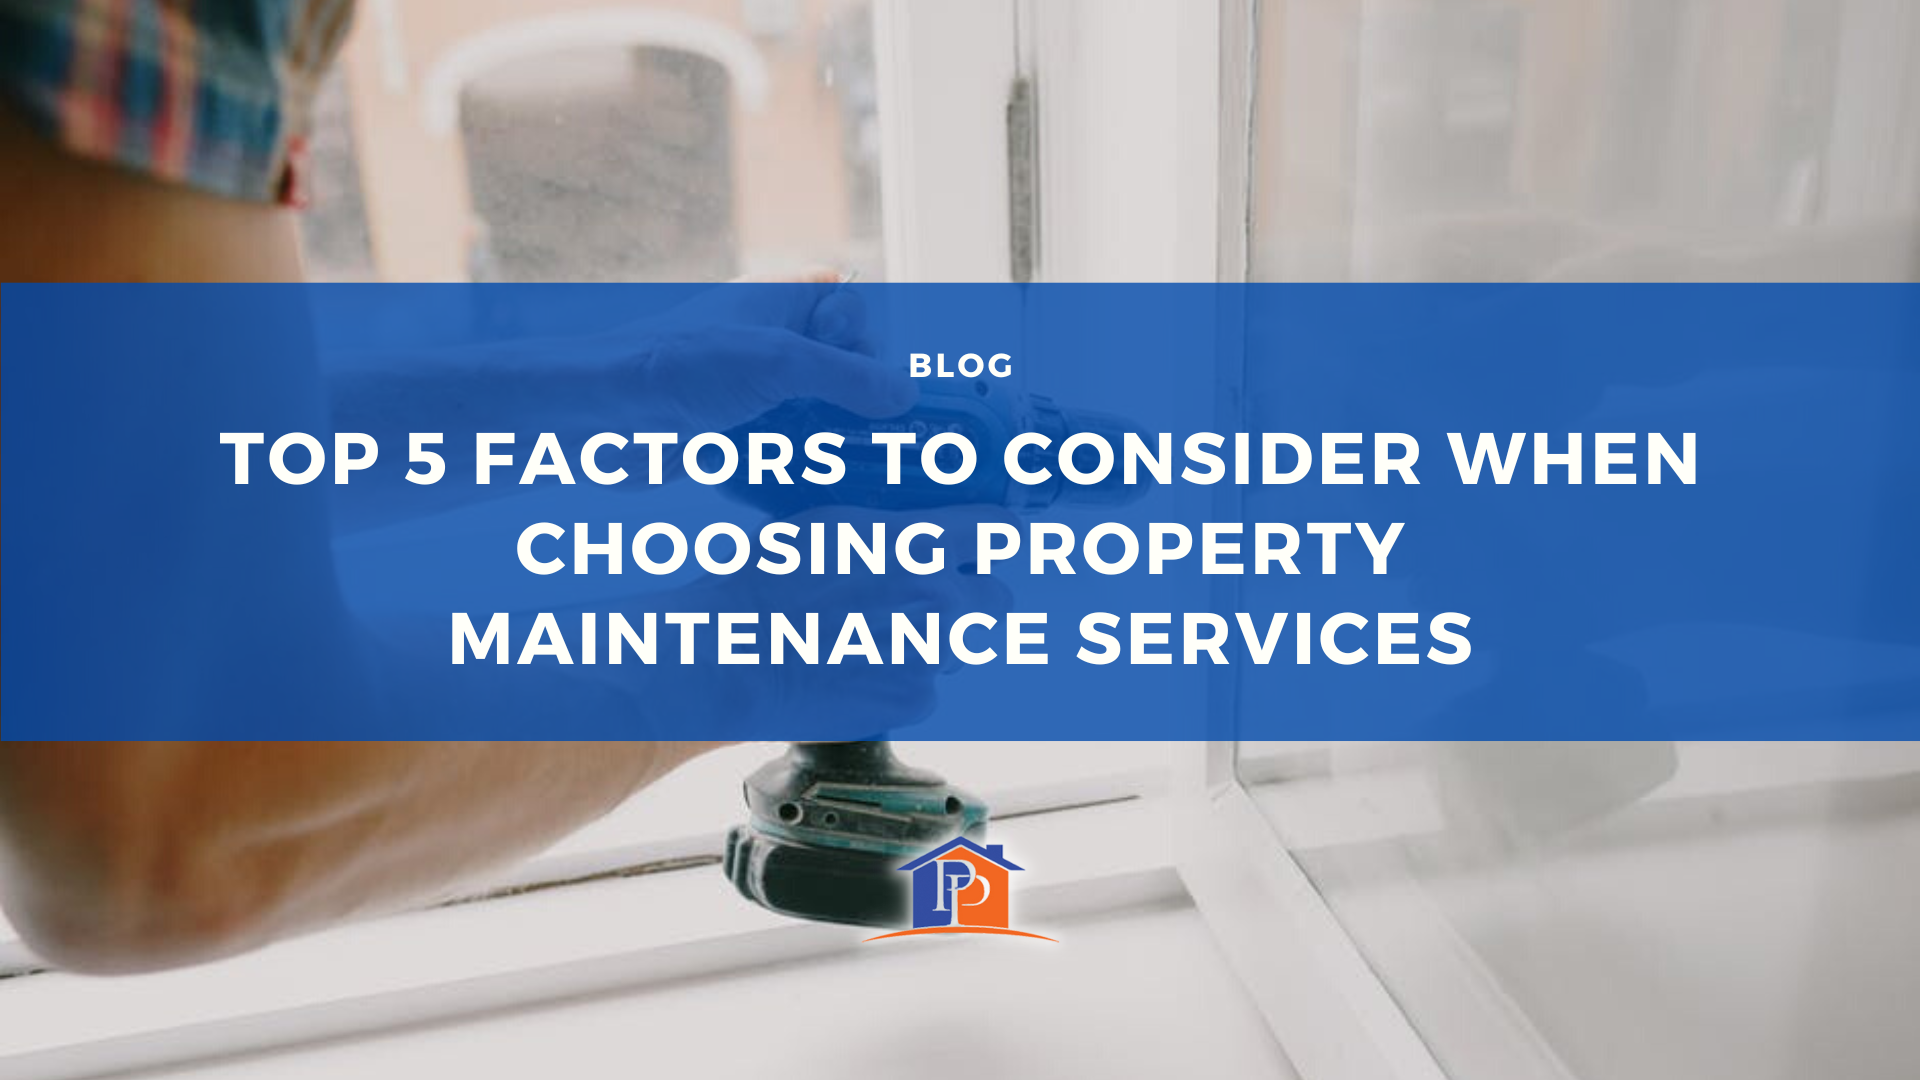 Top 5 Factors to Consider When Choosing Property Maintenance Services